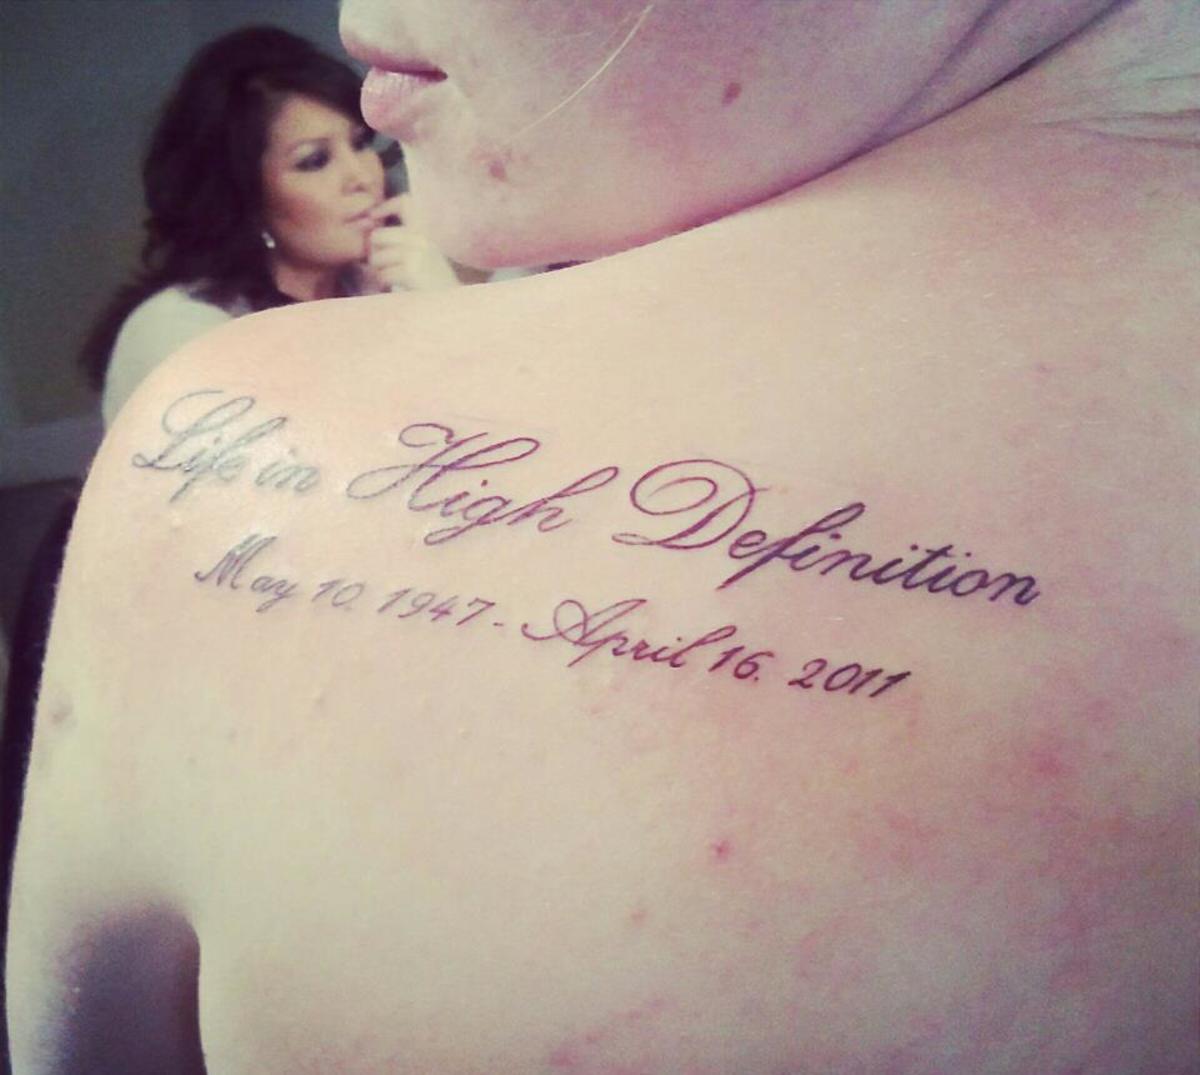 It was my sister's idea. She got my uncle's motto with his birth/death dates